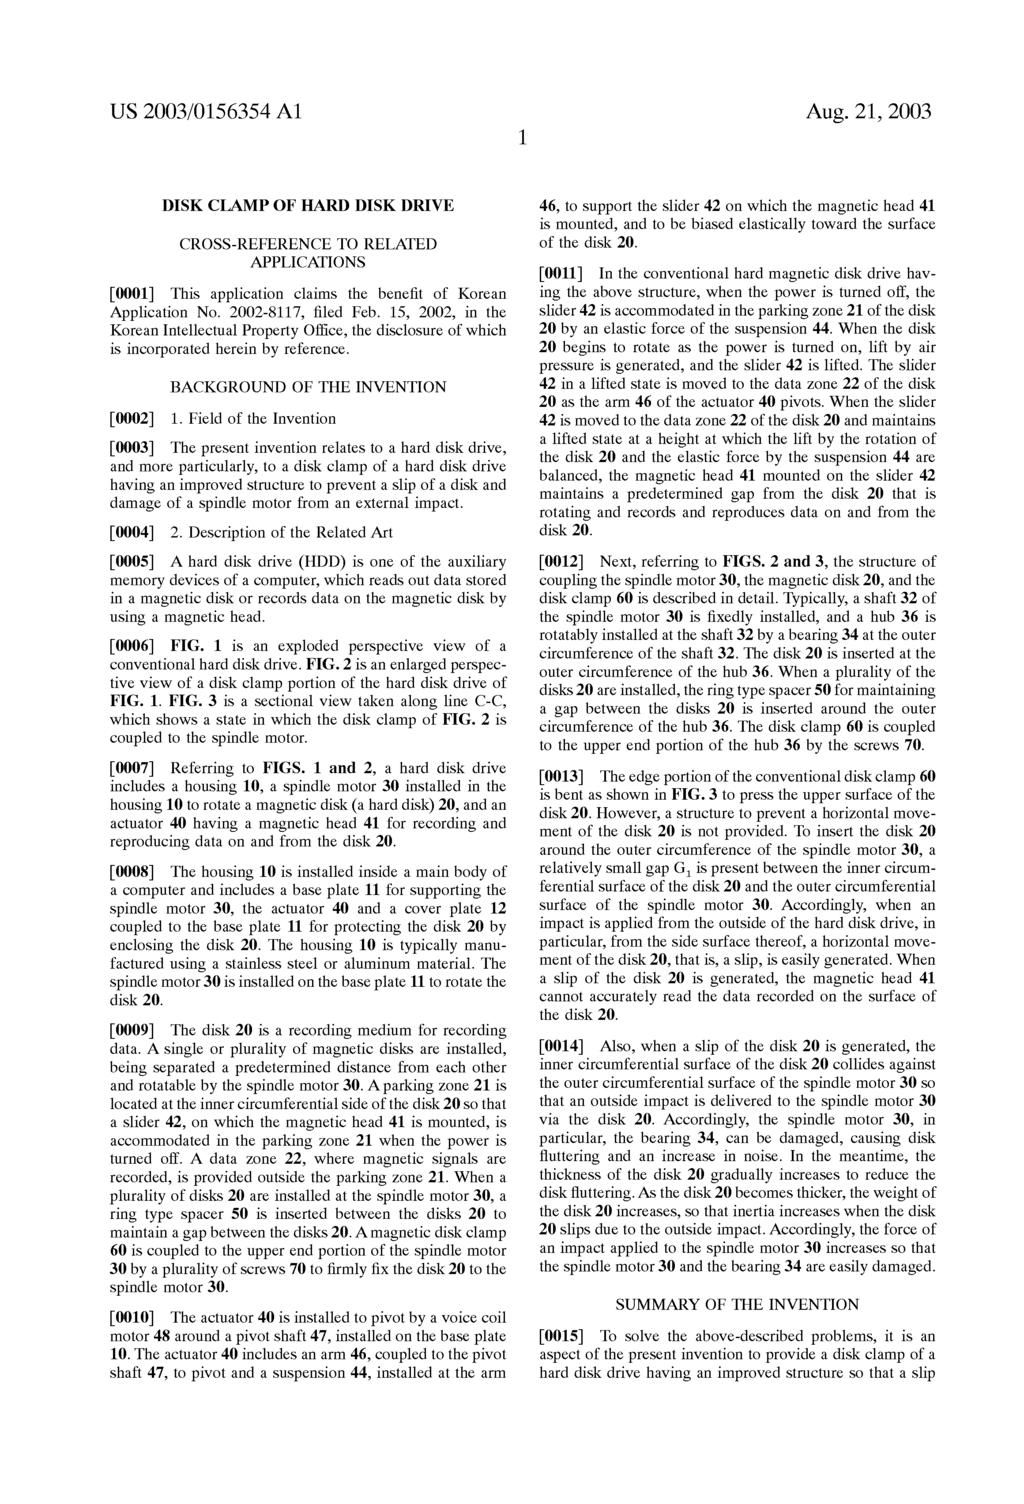 US 2003/0156354 A1 Aug. 21, 2003 DISK CLAMP OF HARD DISK DRIVE CROSS-REFERENCE TO RELATED APPLICATIONS 0001. This application claims the benefit of Korean Application No. 2002-8117, filed Feb.